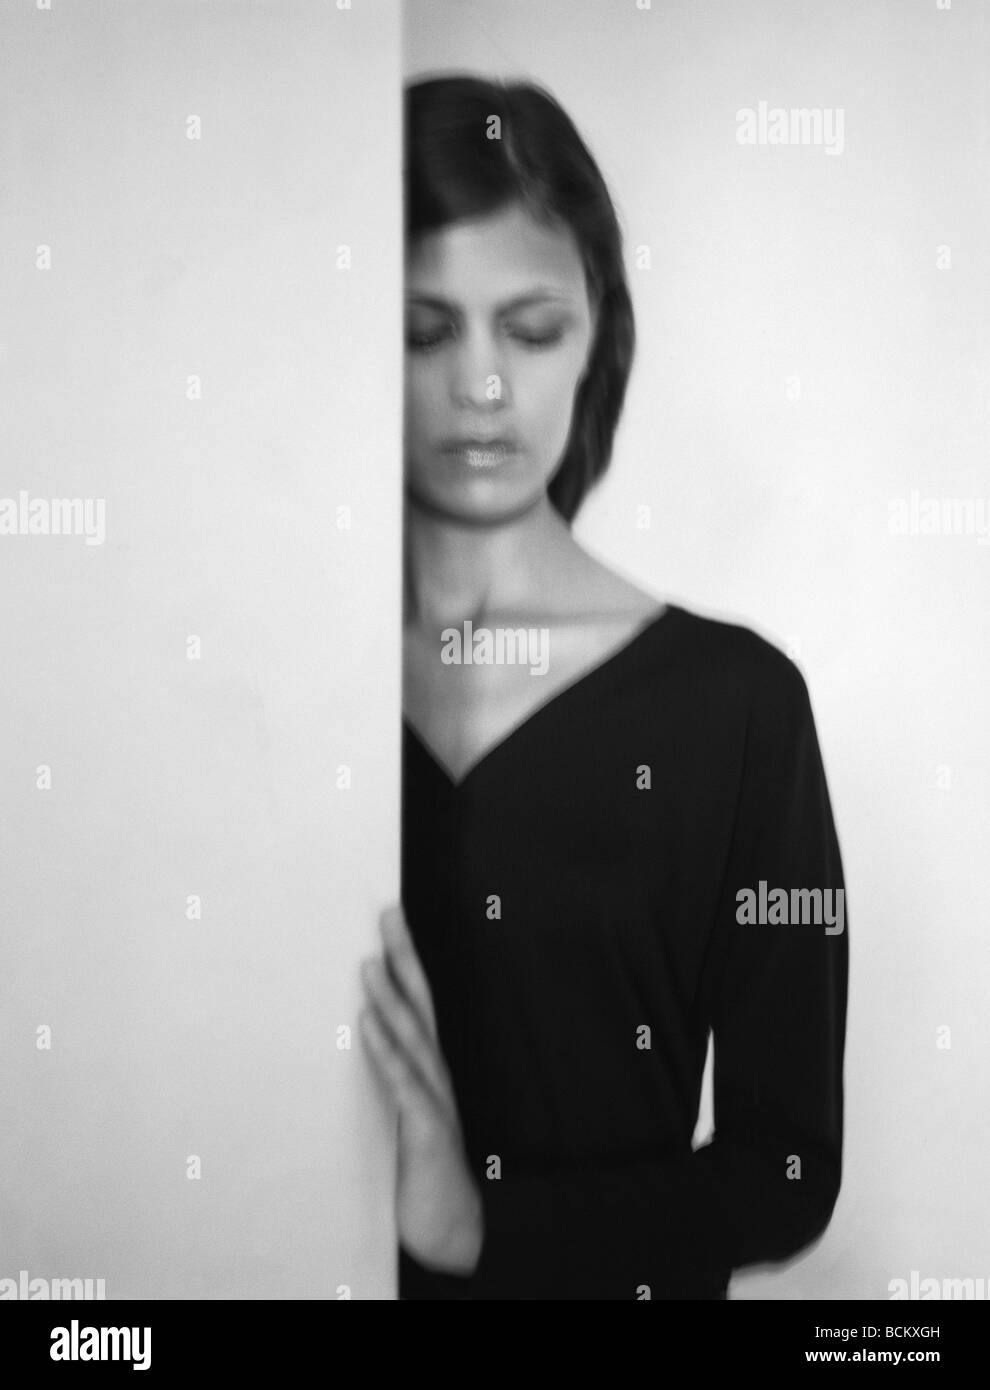 Woman hiding behind wall Black and White Stock Photos & Images - Alamy